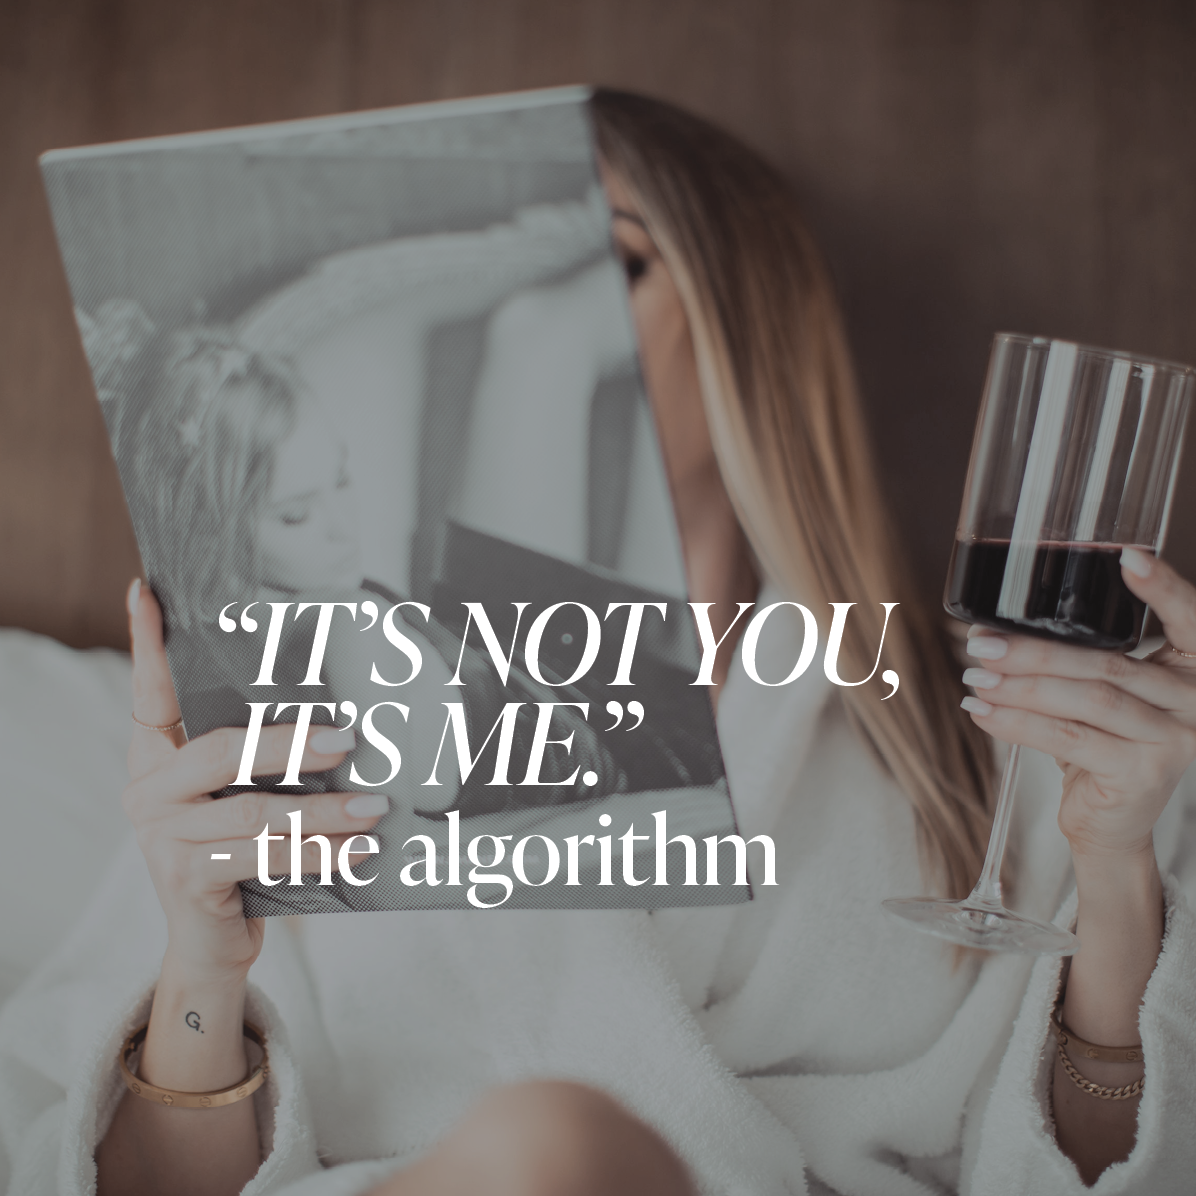 Woman sitting in bed with a bathroom, glass of red wine, reading a magazine with white text overlay that reads "It's not you, it's me. -The Algorithm"